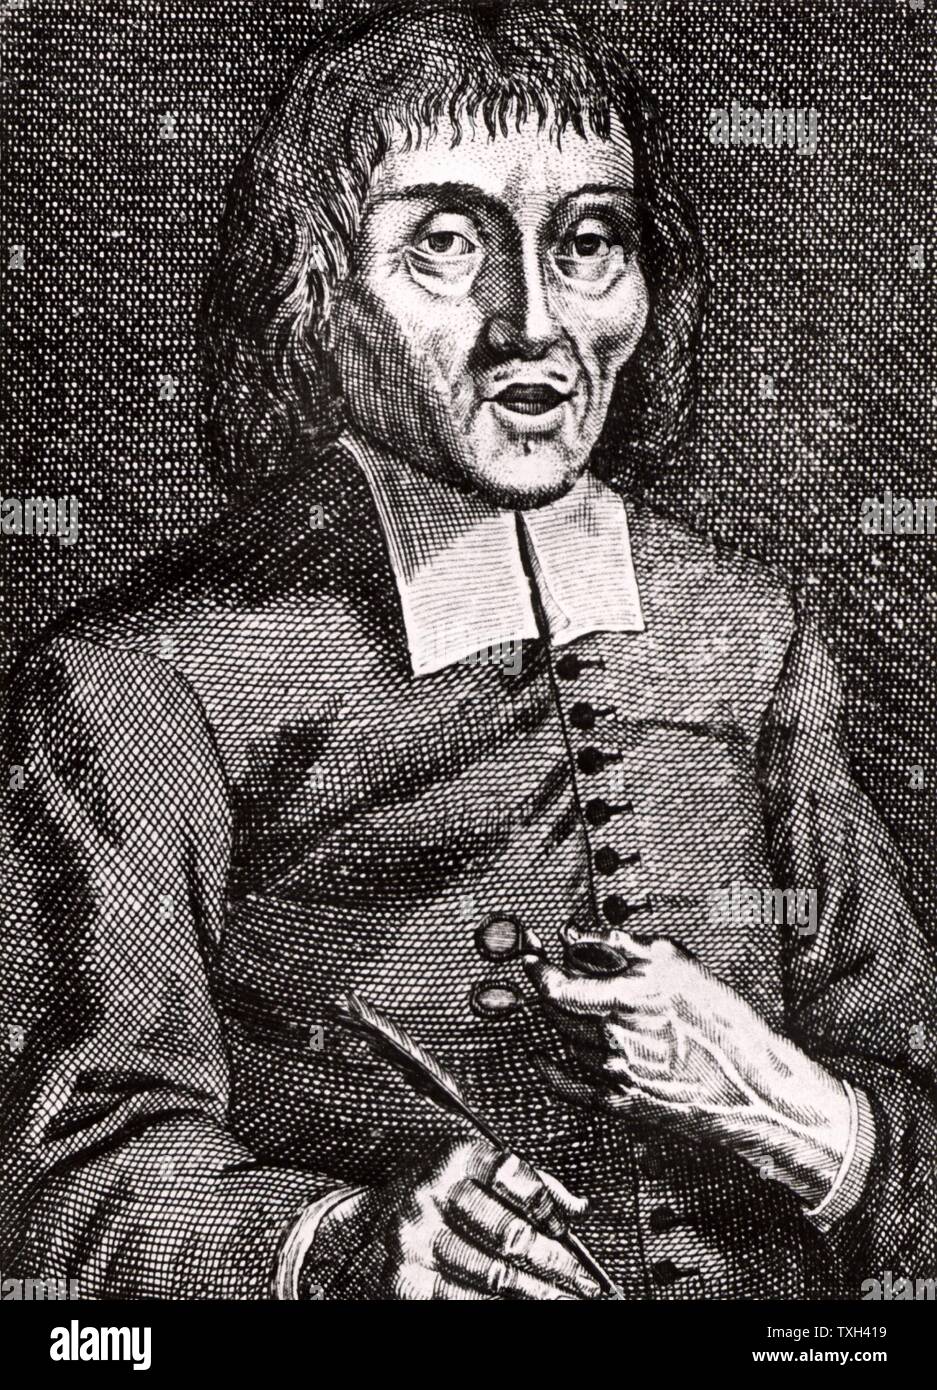 Jacob Brill (1639-1700) Dutch philosopher and follower of Spinoza.   Engraving from 'Icones Virorum' by Friedrich Roth-Scholtz (Nuremberg, 1725). Stock Photo